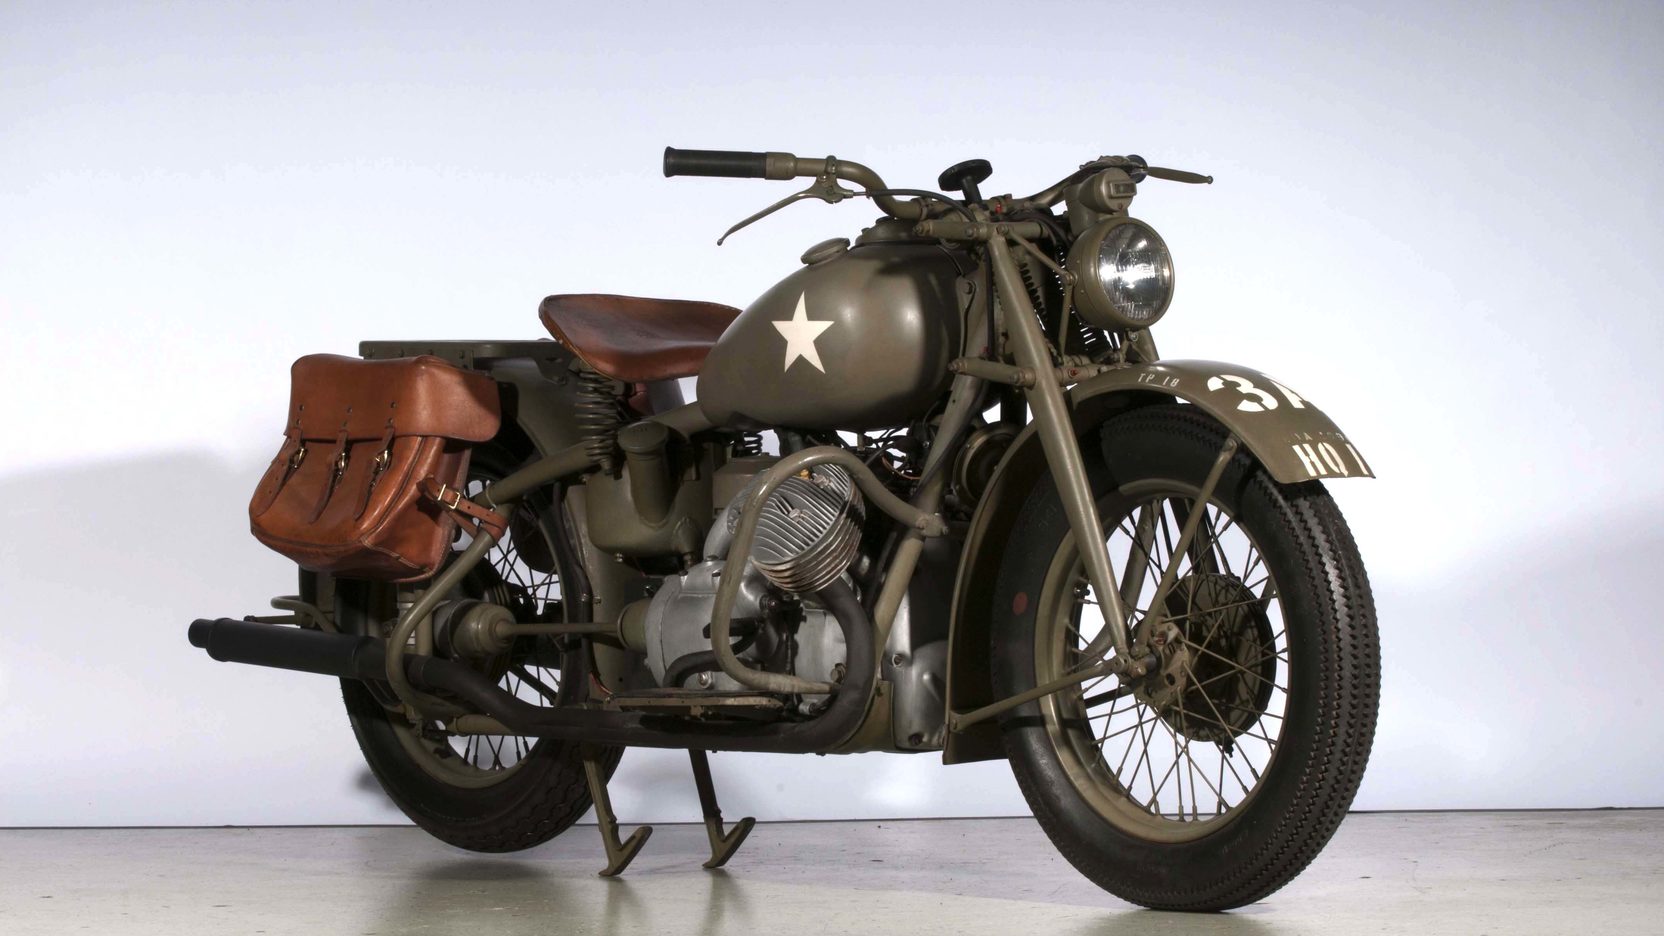 The Best Motorcycles of the 1940s